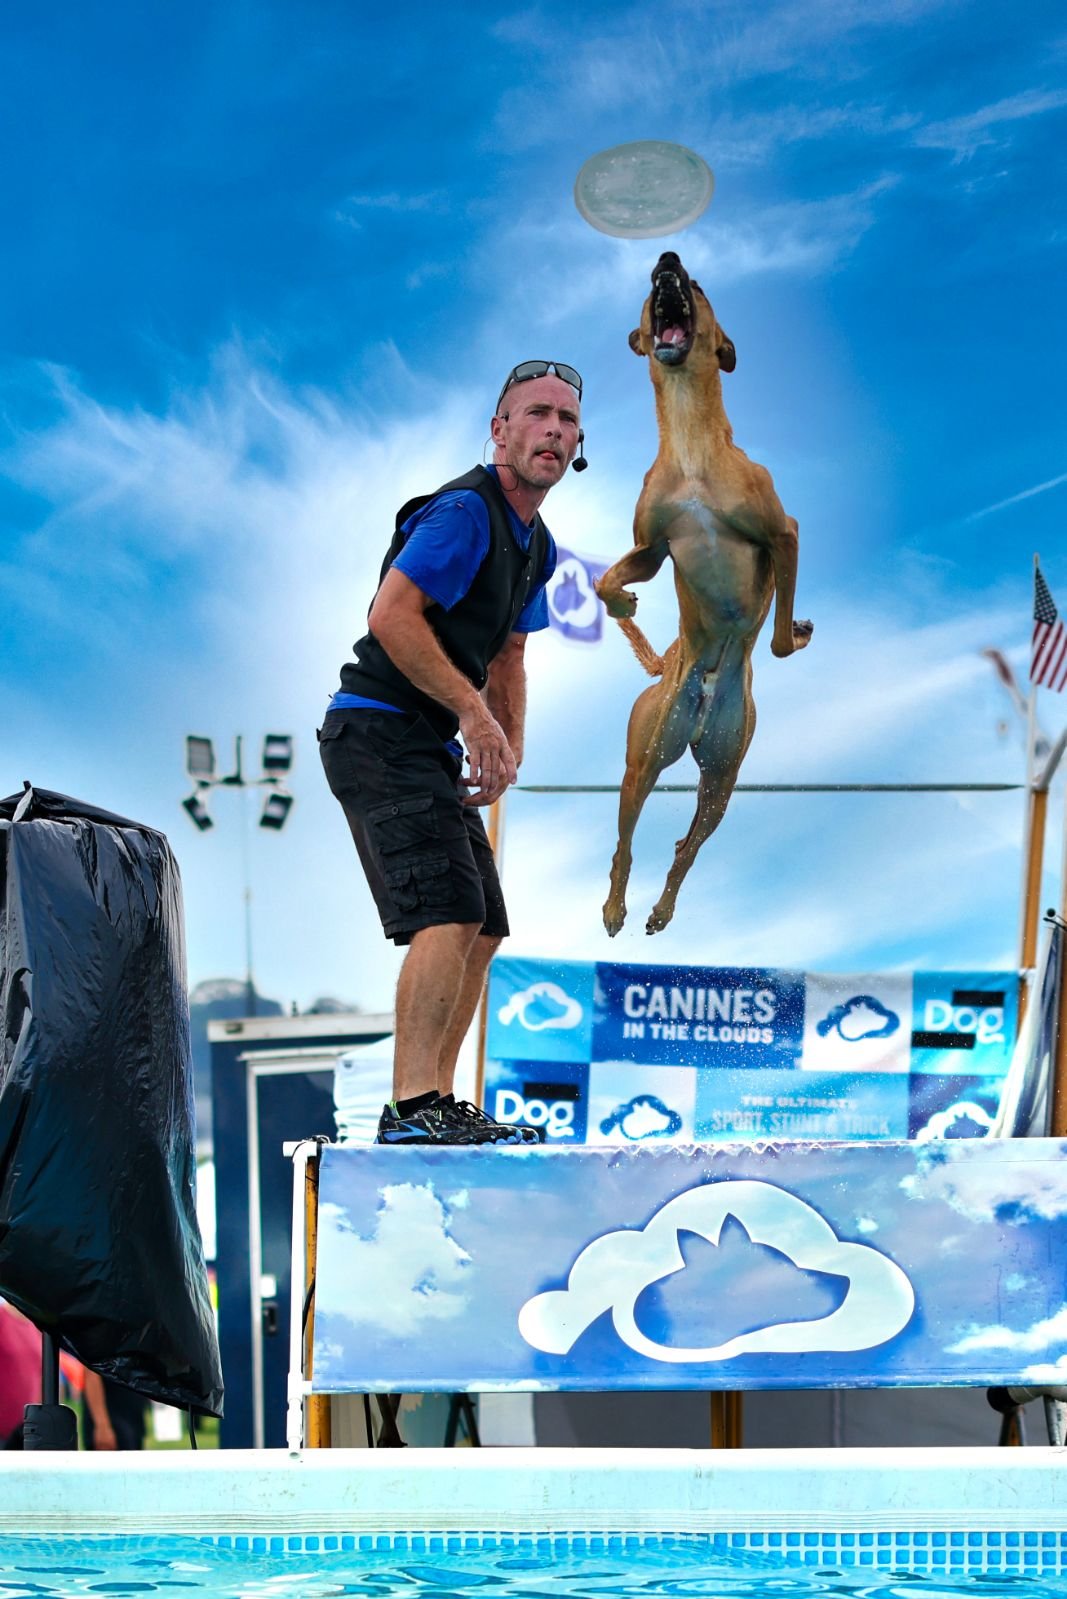 Canines In The Clouds - Artists and Attractions (2).jpeg